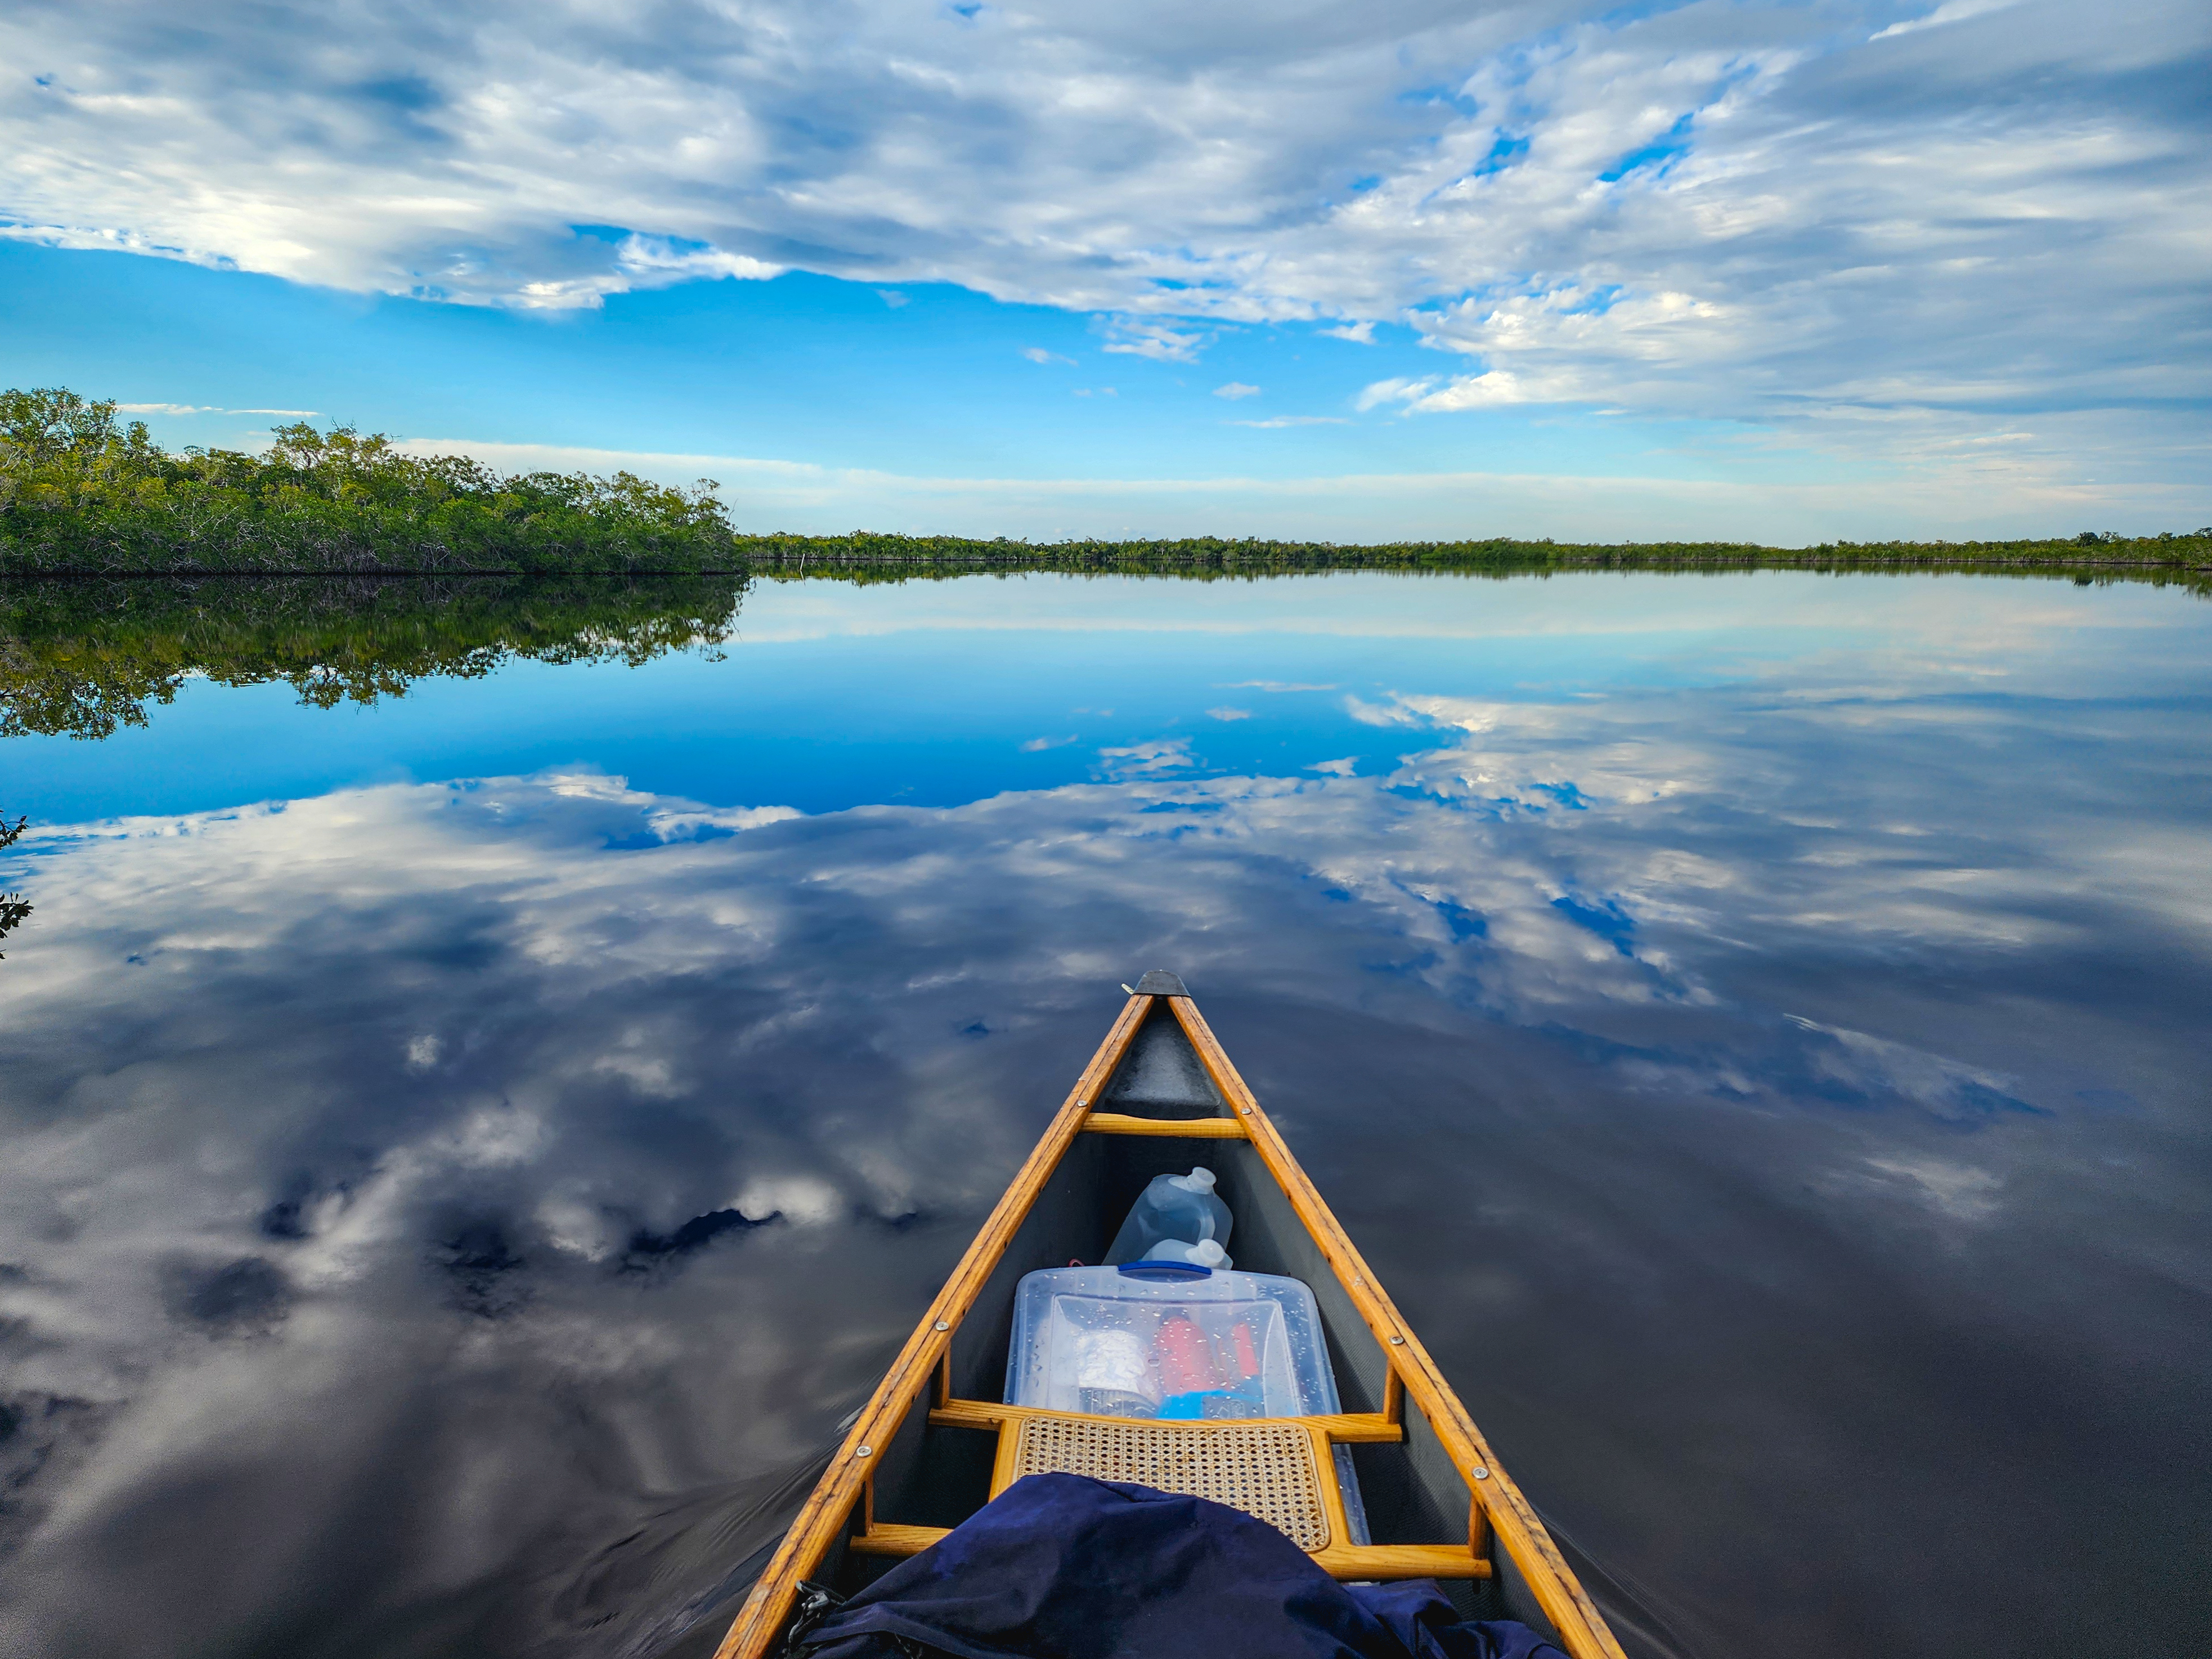 The bow of a canoe loaded with gear floats on open water with a perfect reflection of a blue sky with white clouds. The surrounding shorelines are lined with mangrove trees in the distance,